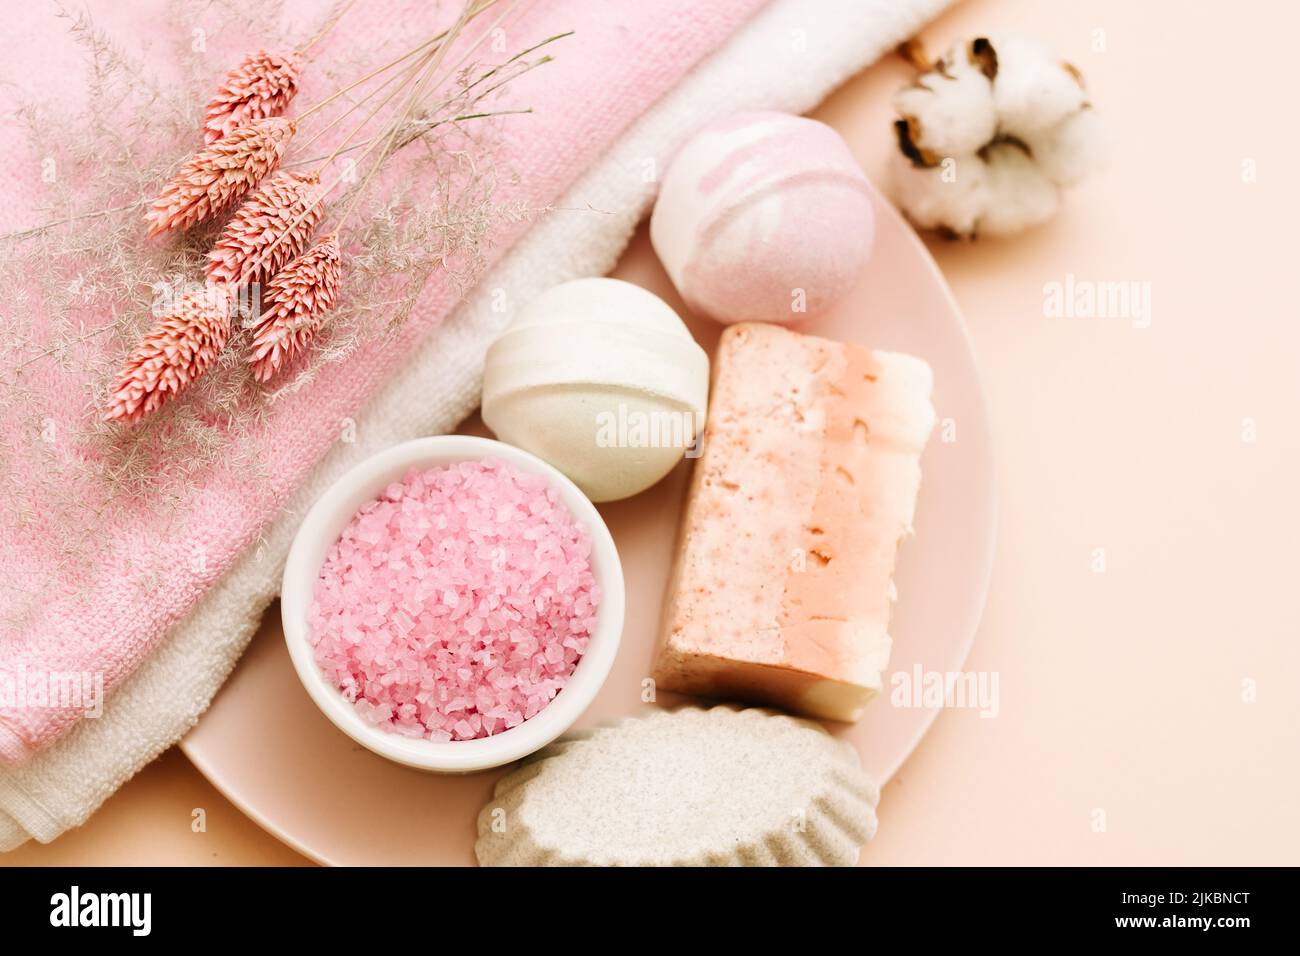 bath pampering set beauty care relaxation leisure Stock Photo